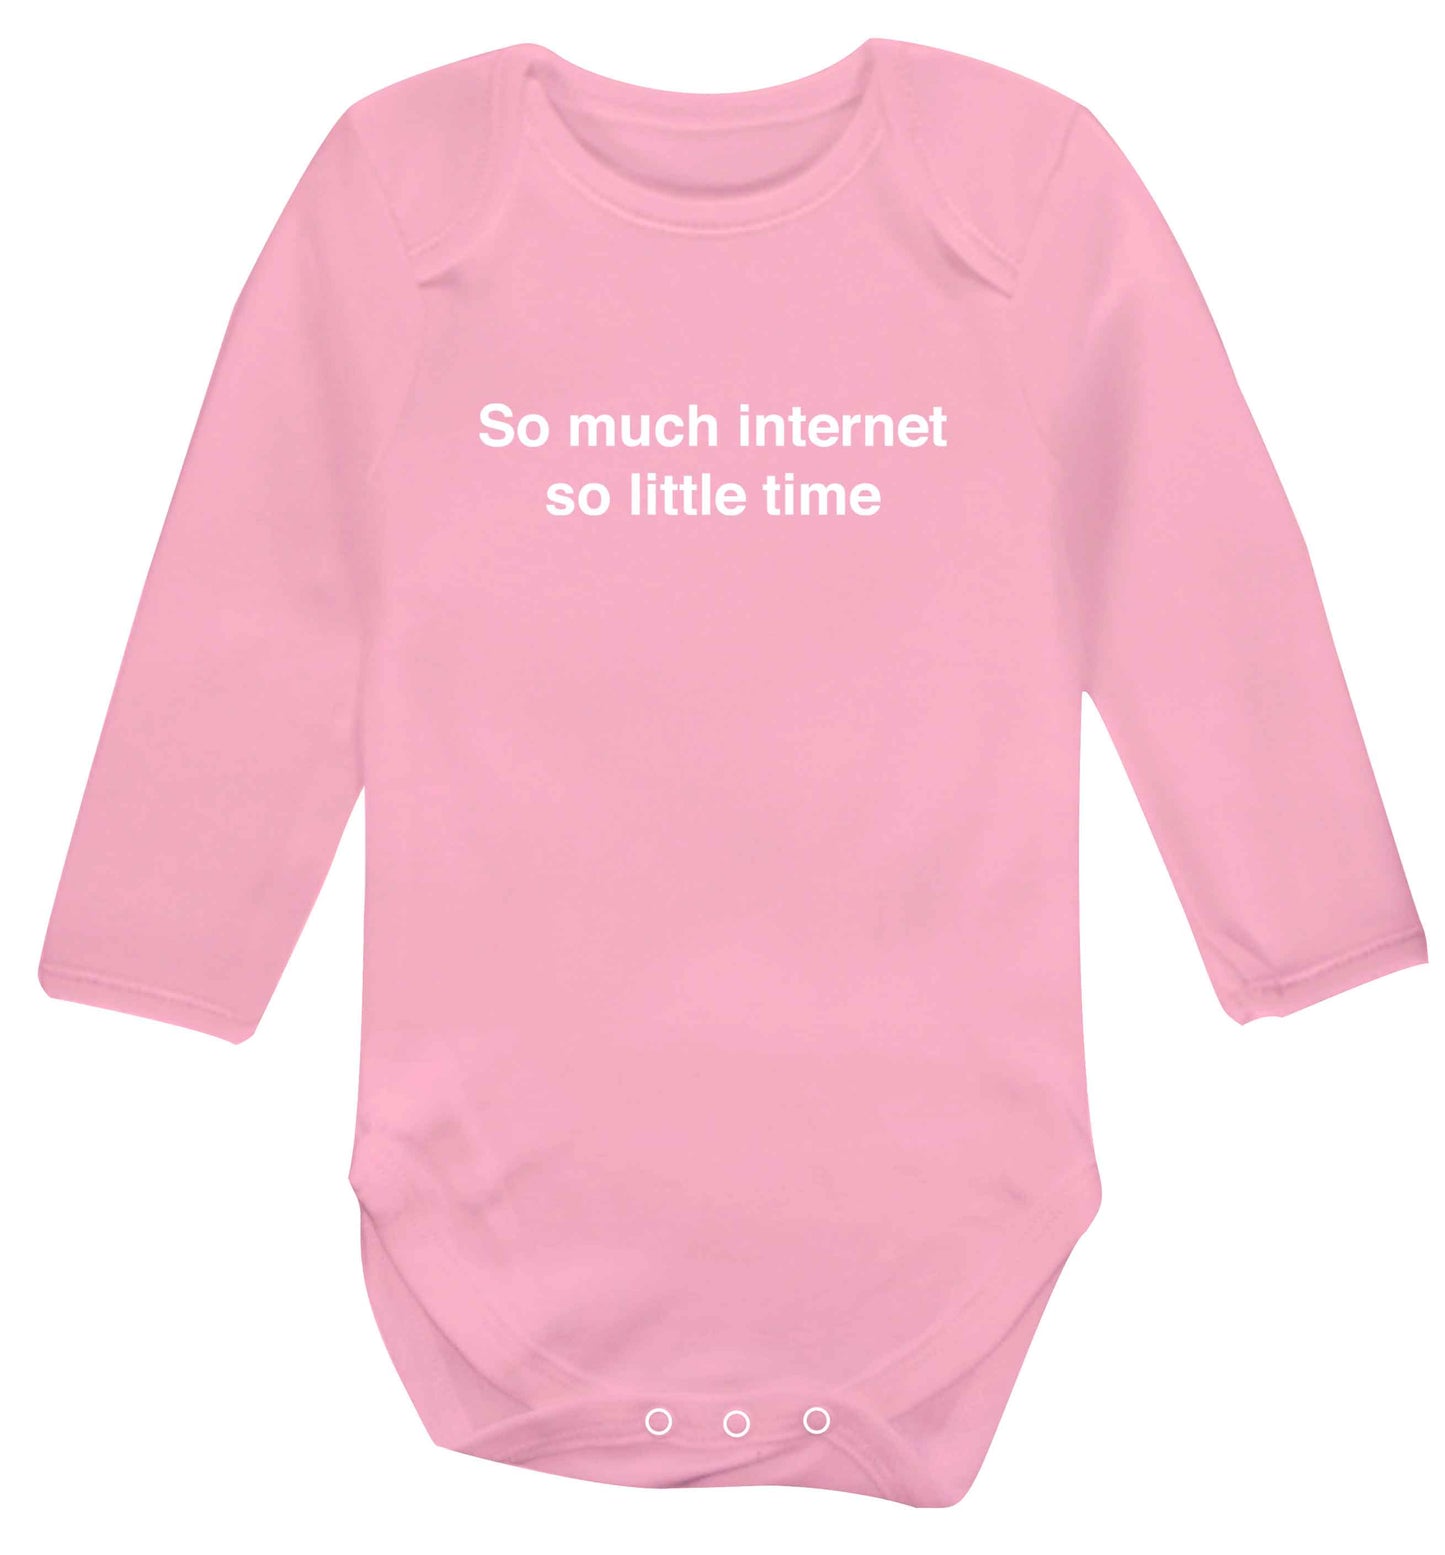 So much internet so little time baby vest long sleeved pale pink 6-12 months